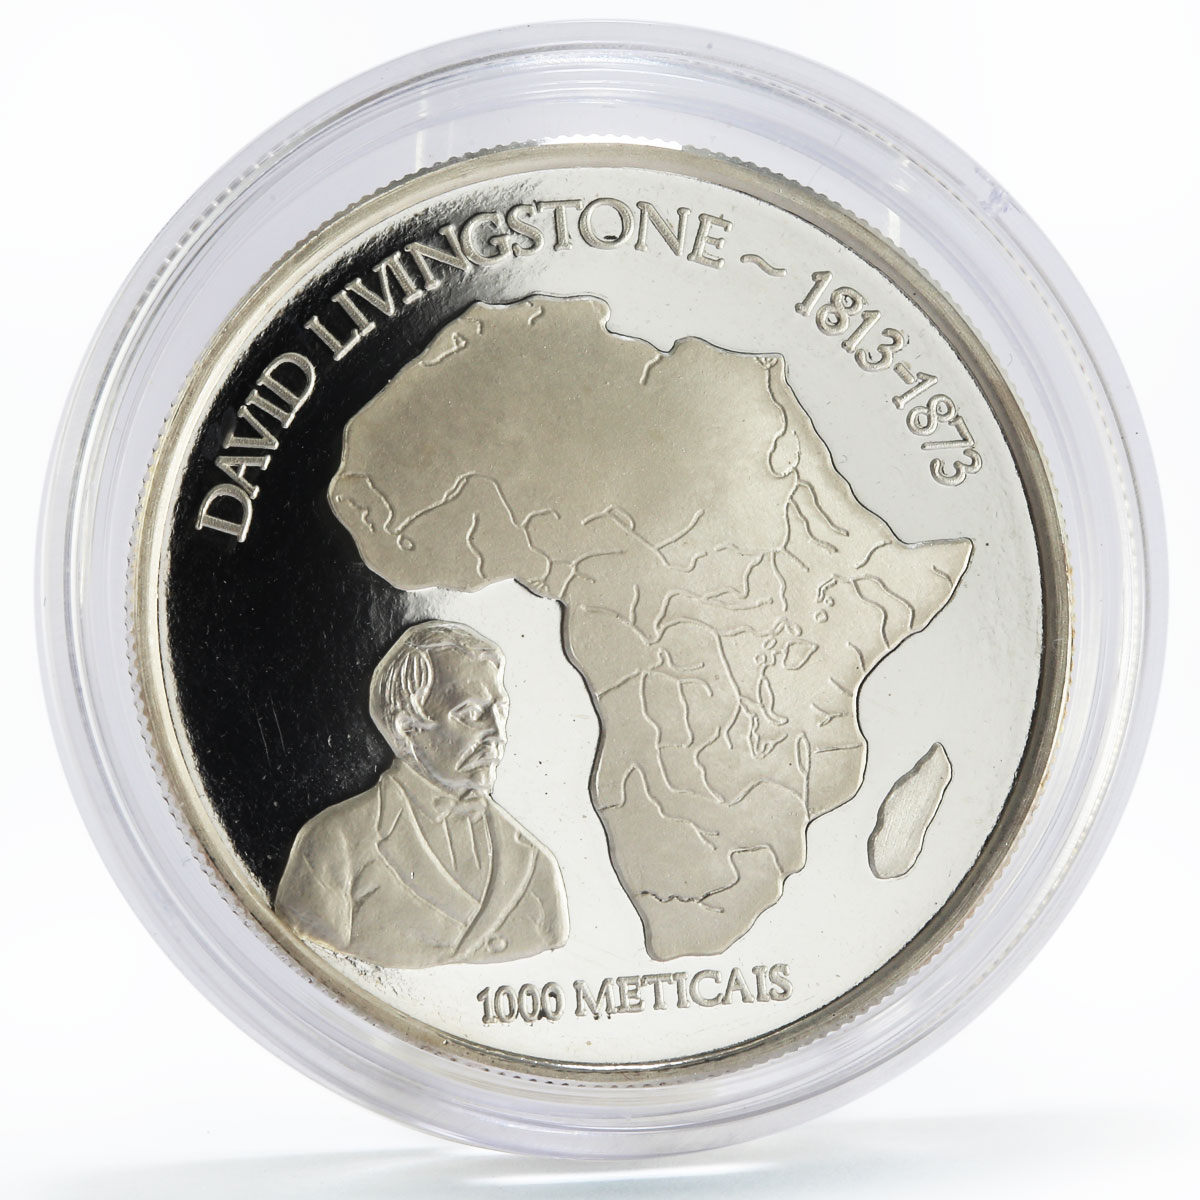 Mozambique 1000 meticais David Livingstone and African Map silver coin 2004